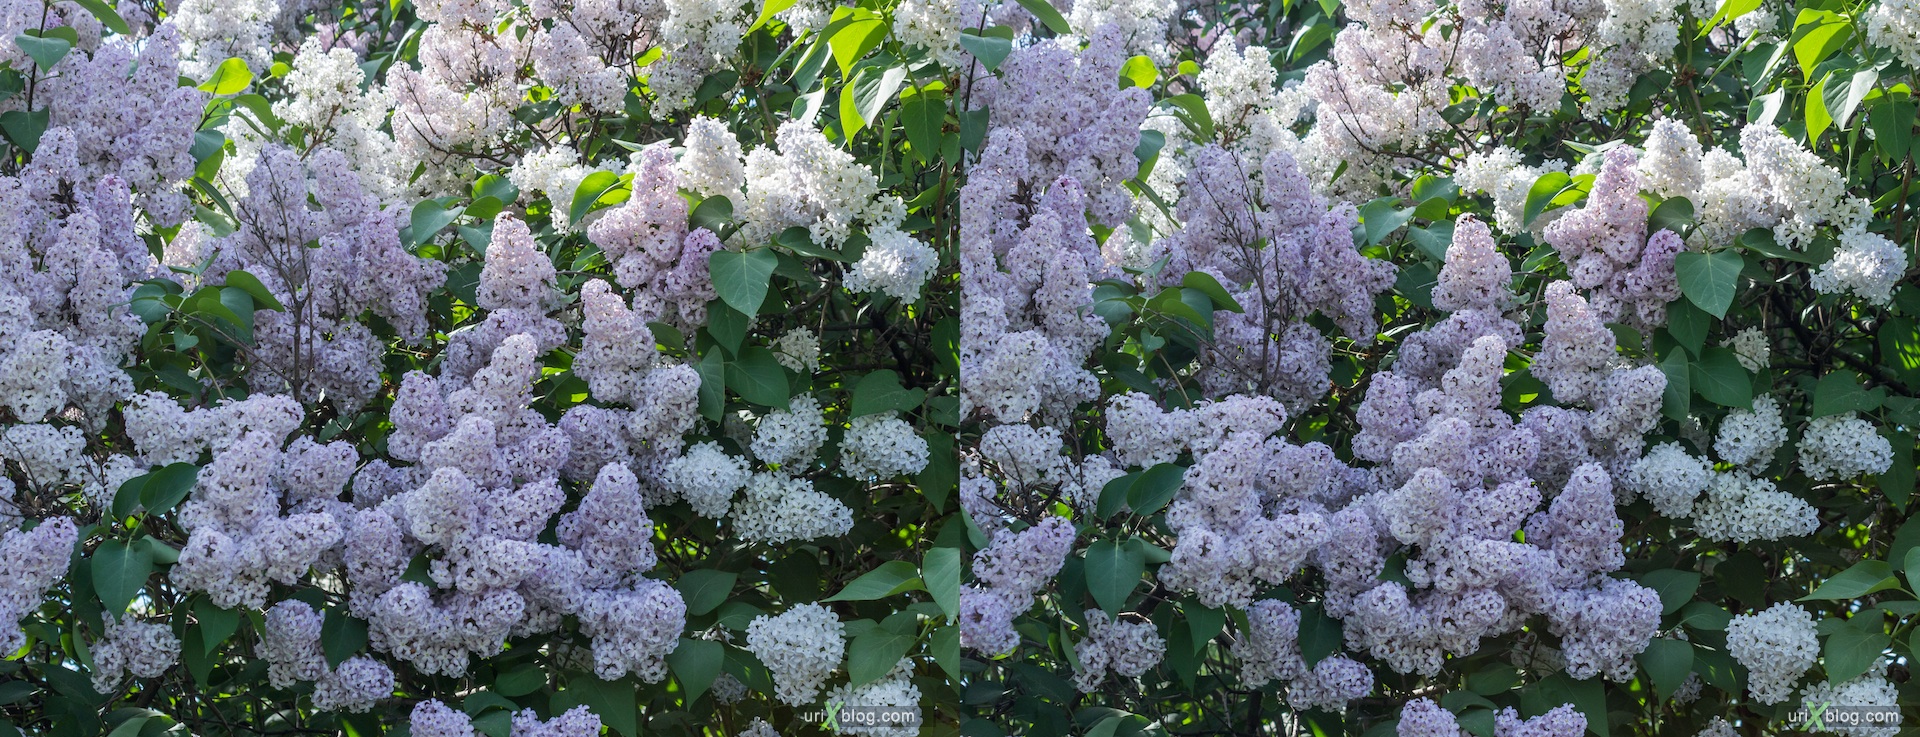 2013, Lilac tree, flower, grass, park, field, Moscow, Russia, spring, 3D, stereo pair, cross-eyed, crossview, cross view stereo pair, stereoscopic